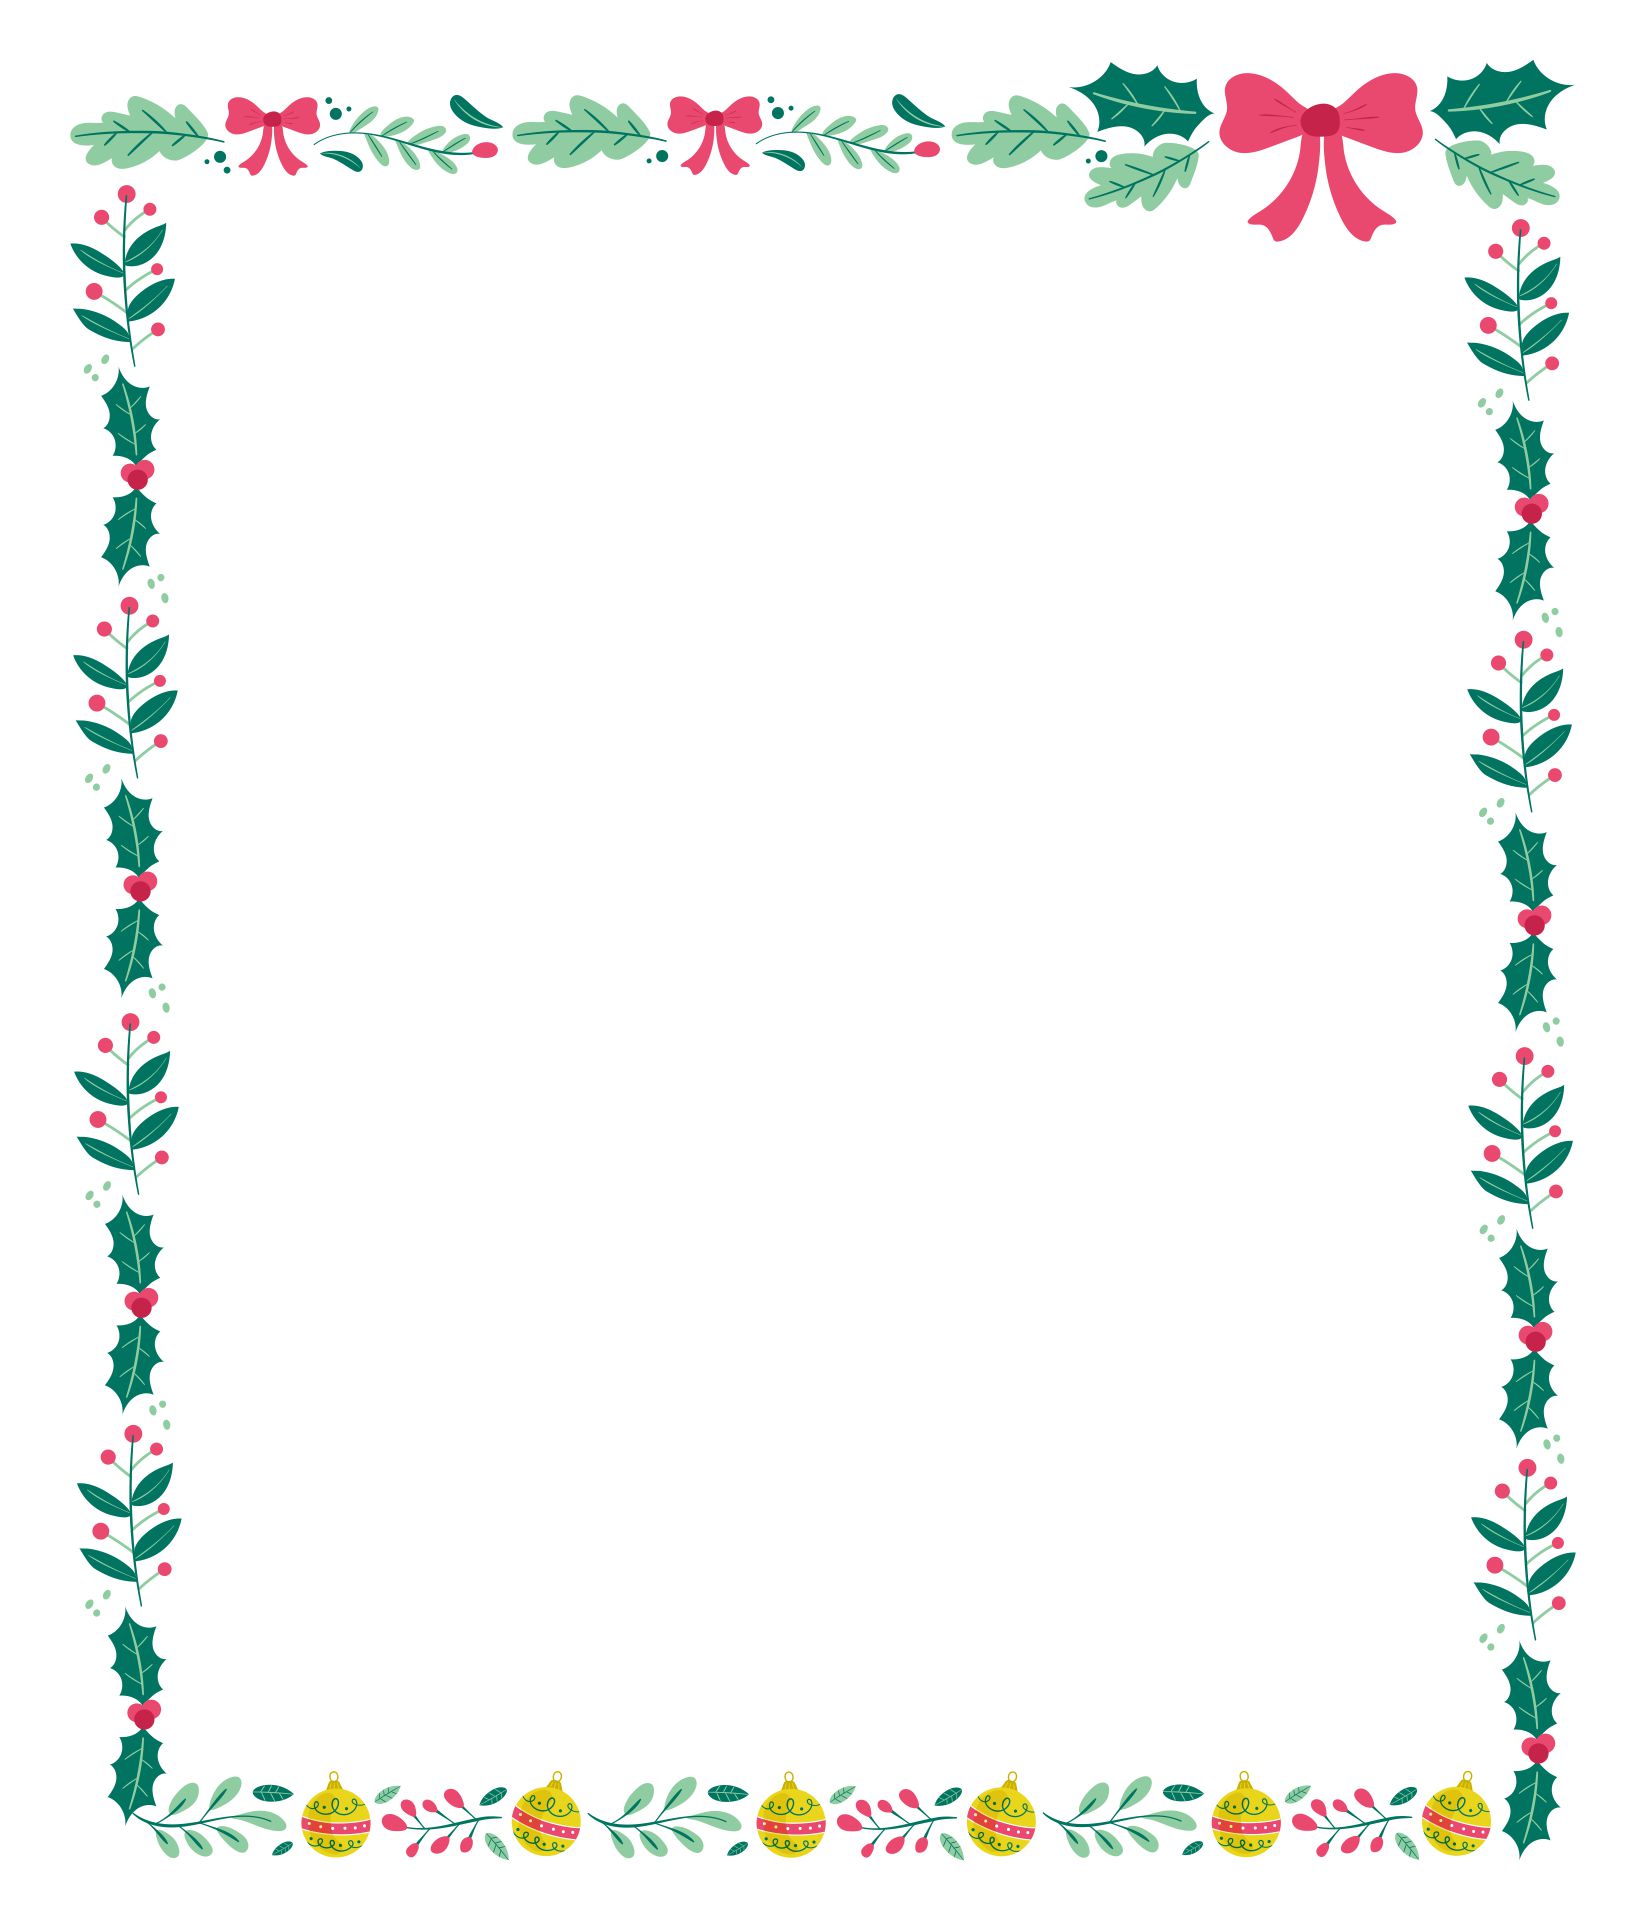 8 Best Images of Free Printable Christmas Borders Holly - Free ...